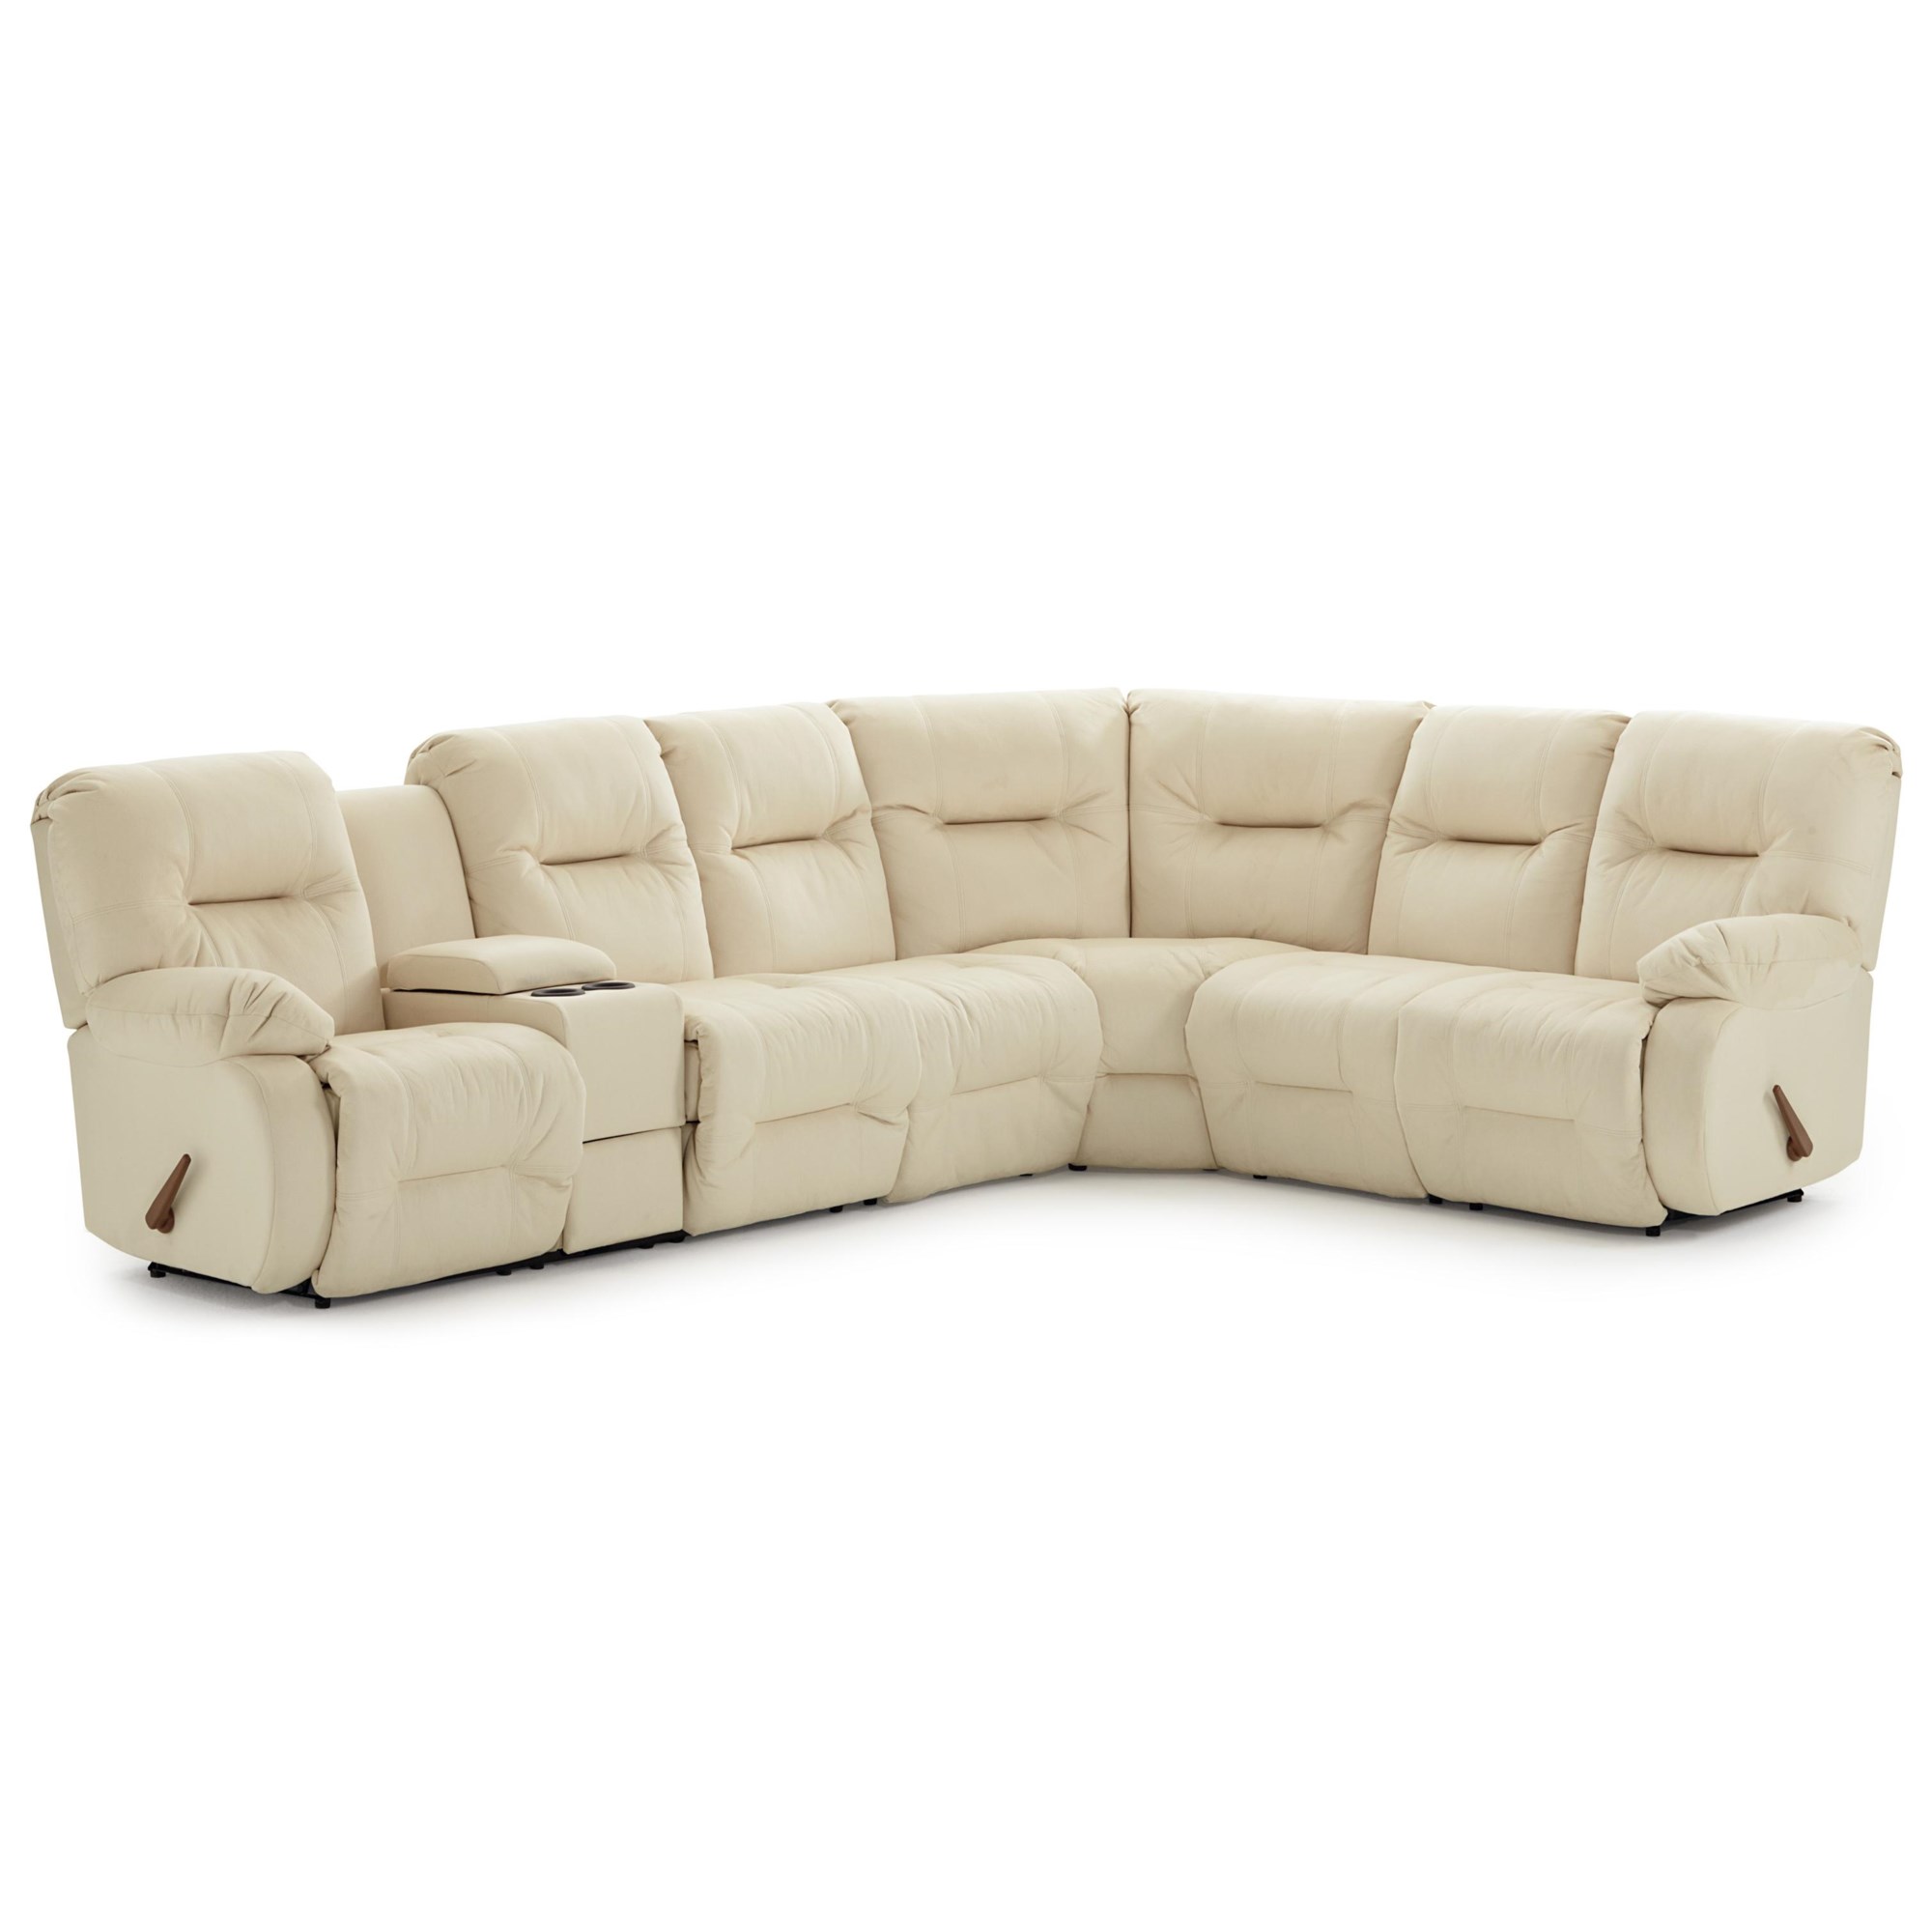 It is not a residential sofa, but it is comfortable and provides